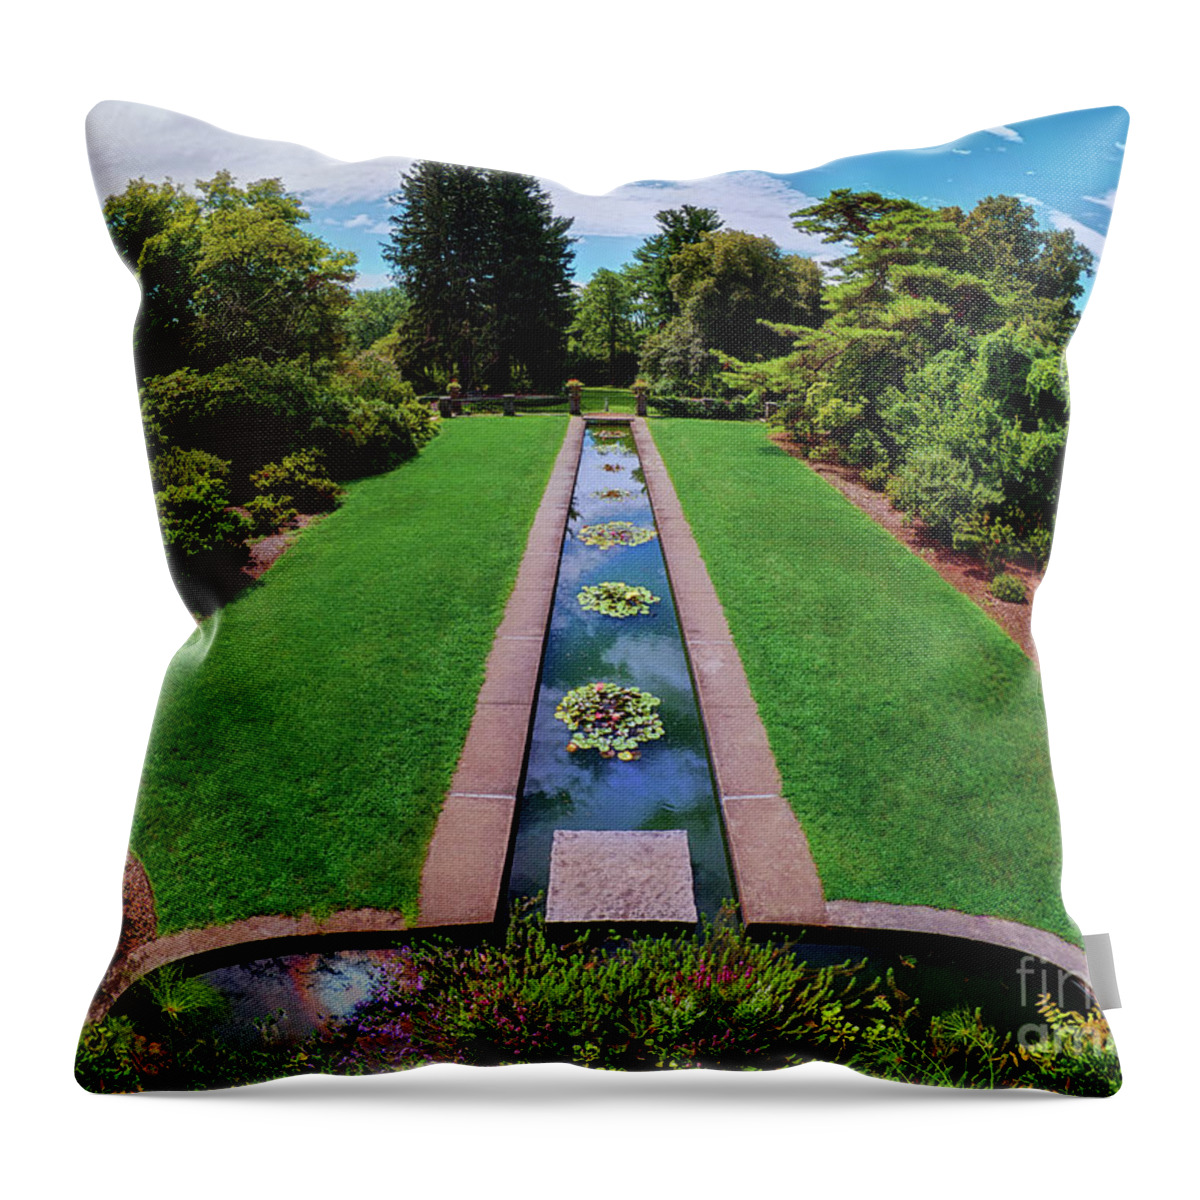 View Throw Pillow featuring the photograph A Happy Garden by Mark Miller